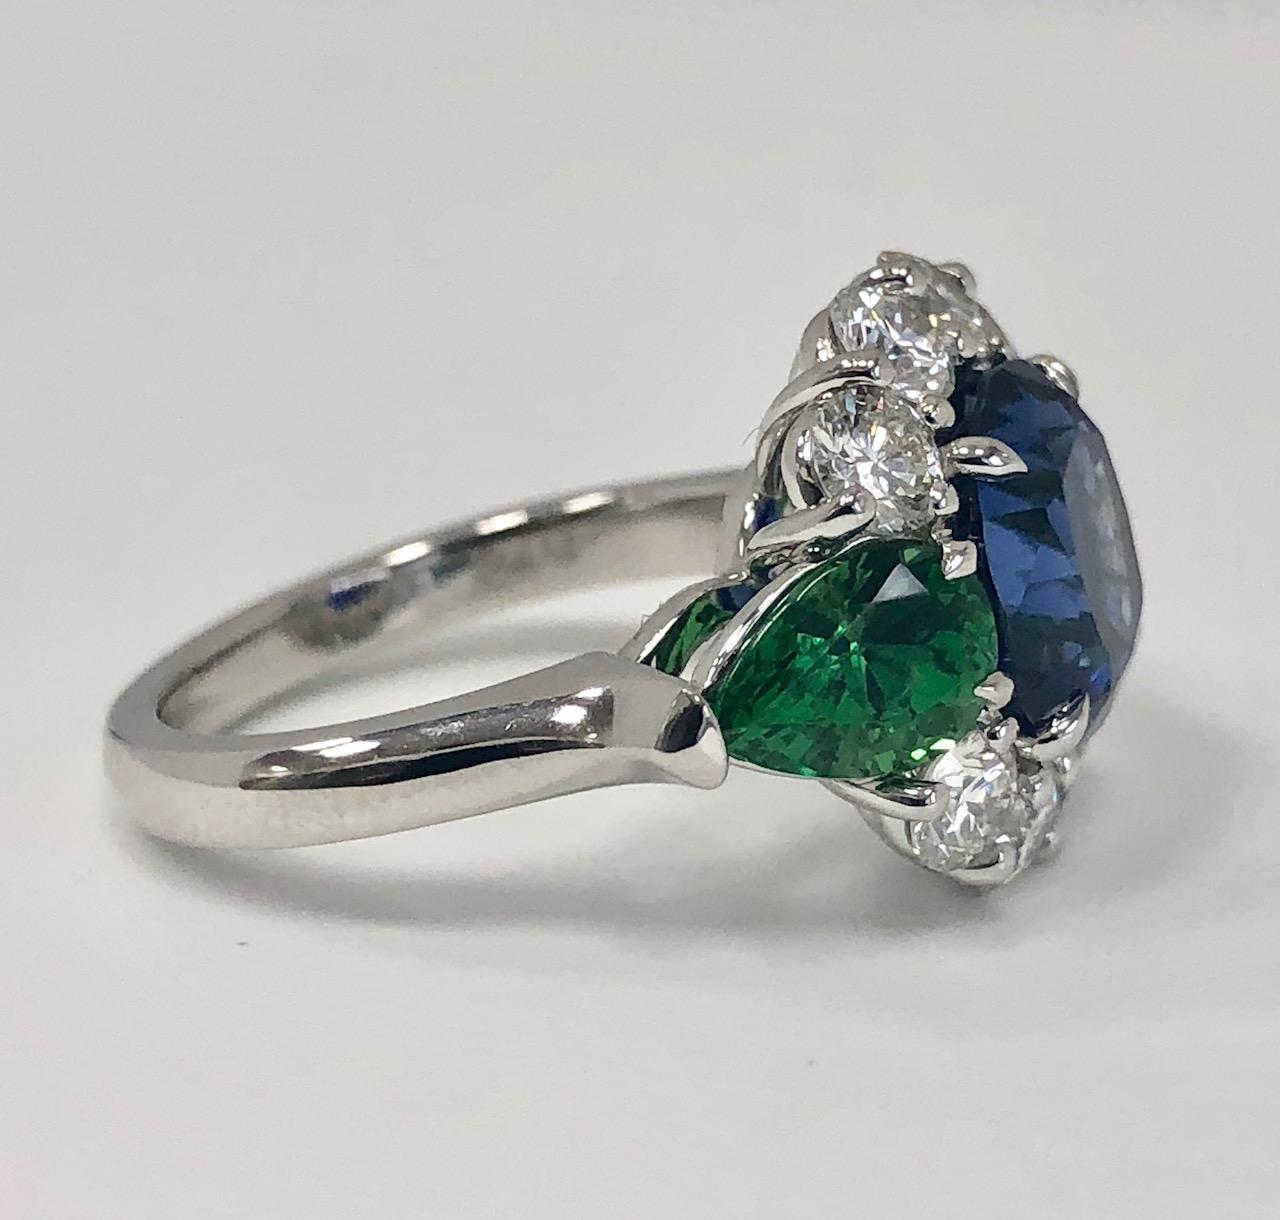 The sapphire, tsavorite and diamond cocktail ring, handmade in platinum is centered on a 4.45 carat vivid blue sapphire, accompanied by an AGL certificate. It is flanked by 2 fine Pear Mixed Cut tsavorite garnets weighing approximately 2.10 carats